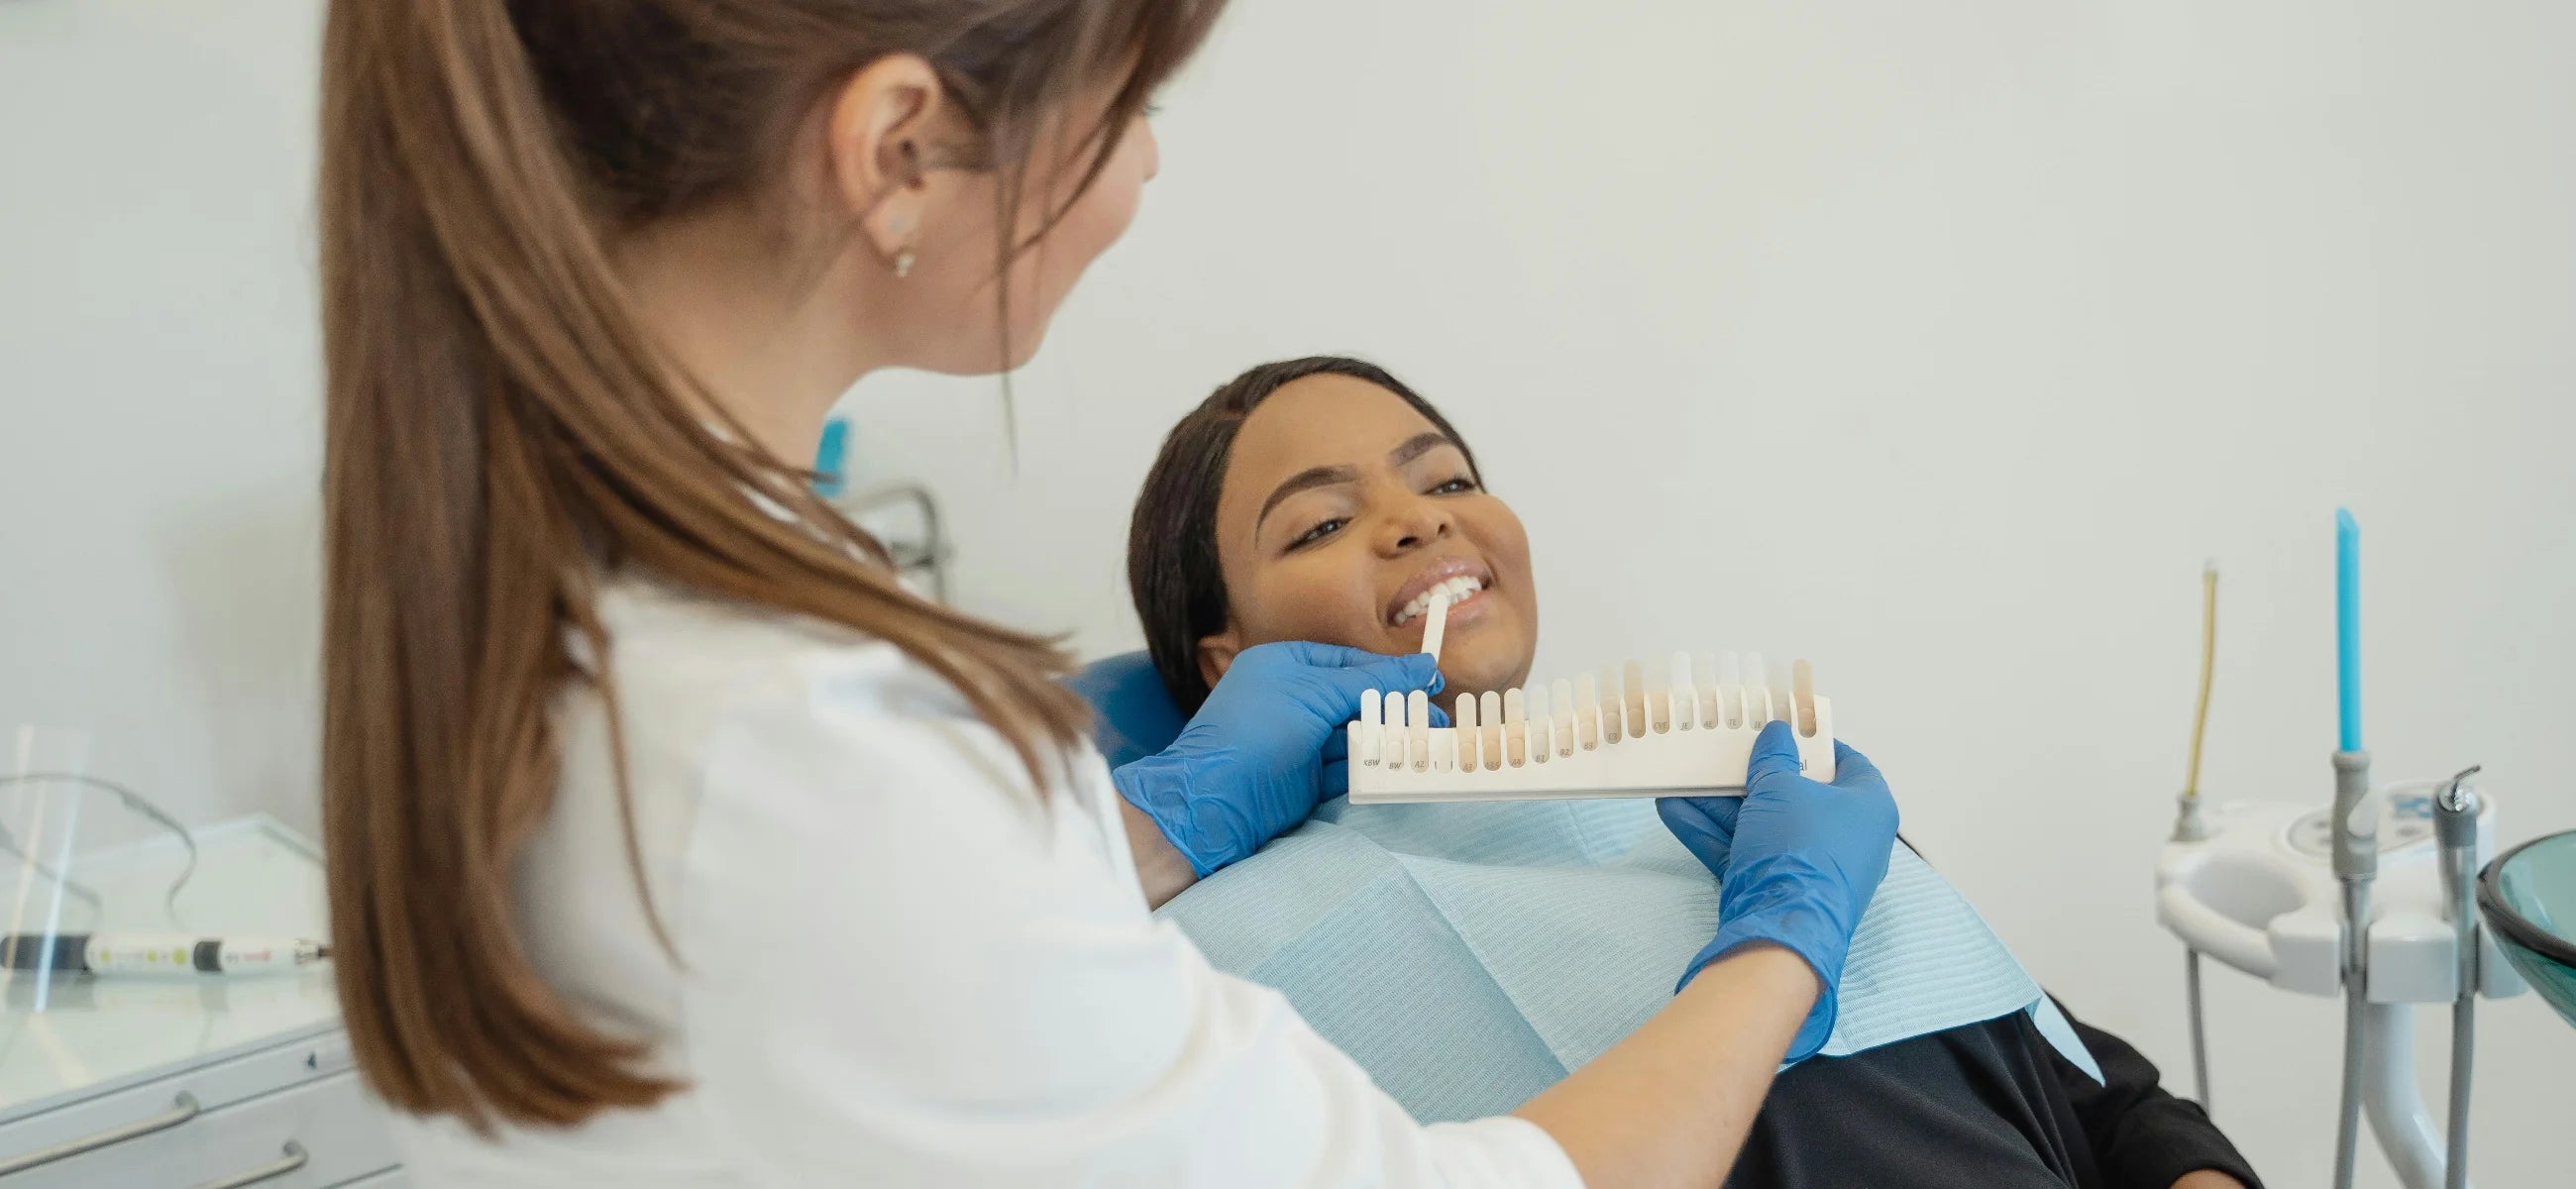 Is teeth whitening safe for your teeth? 7 Q&As